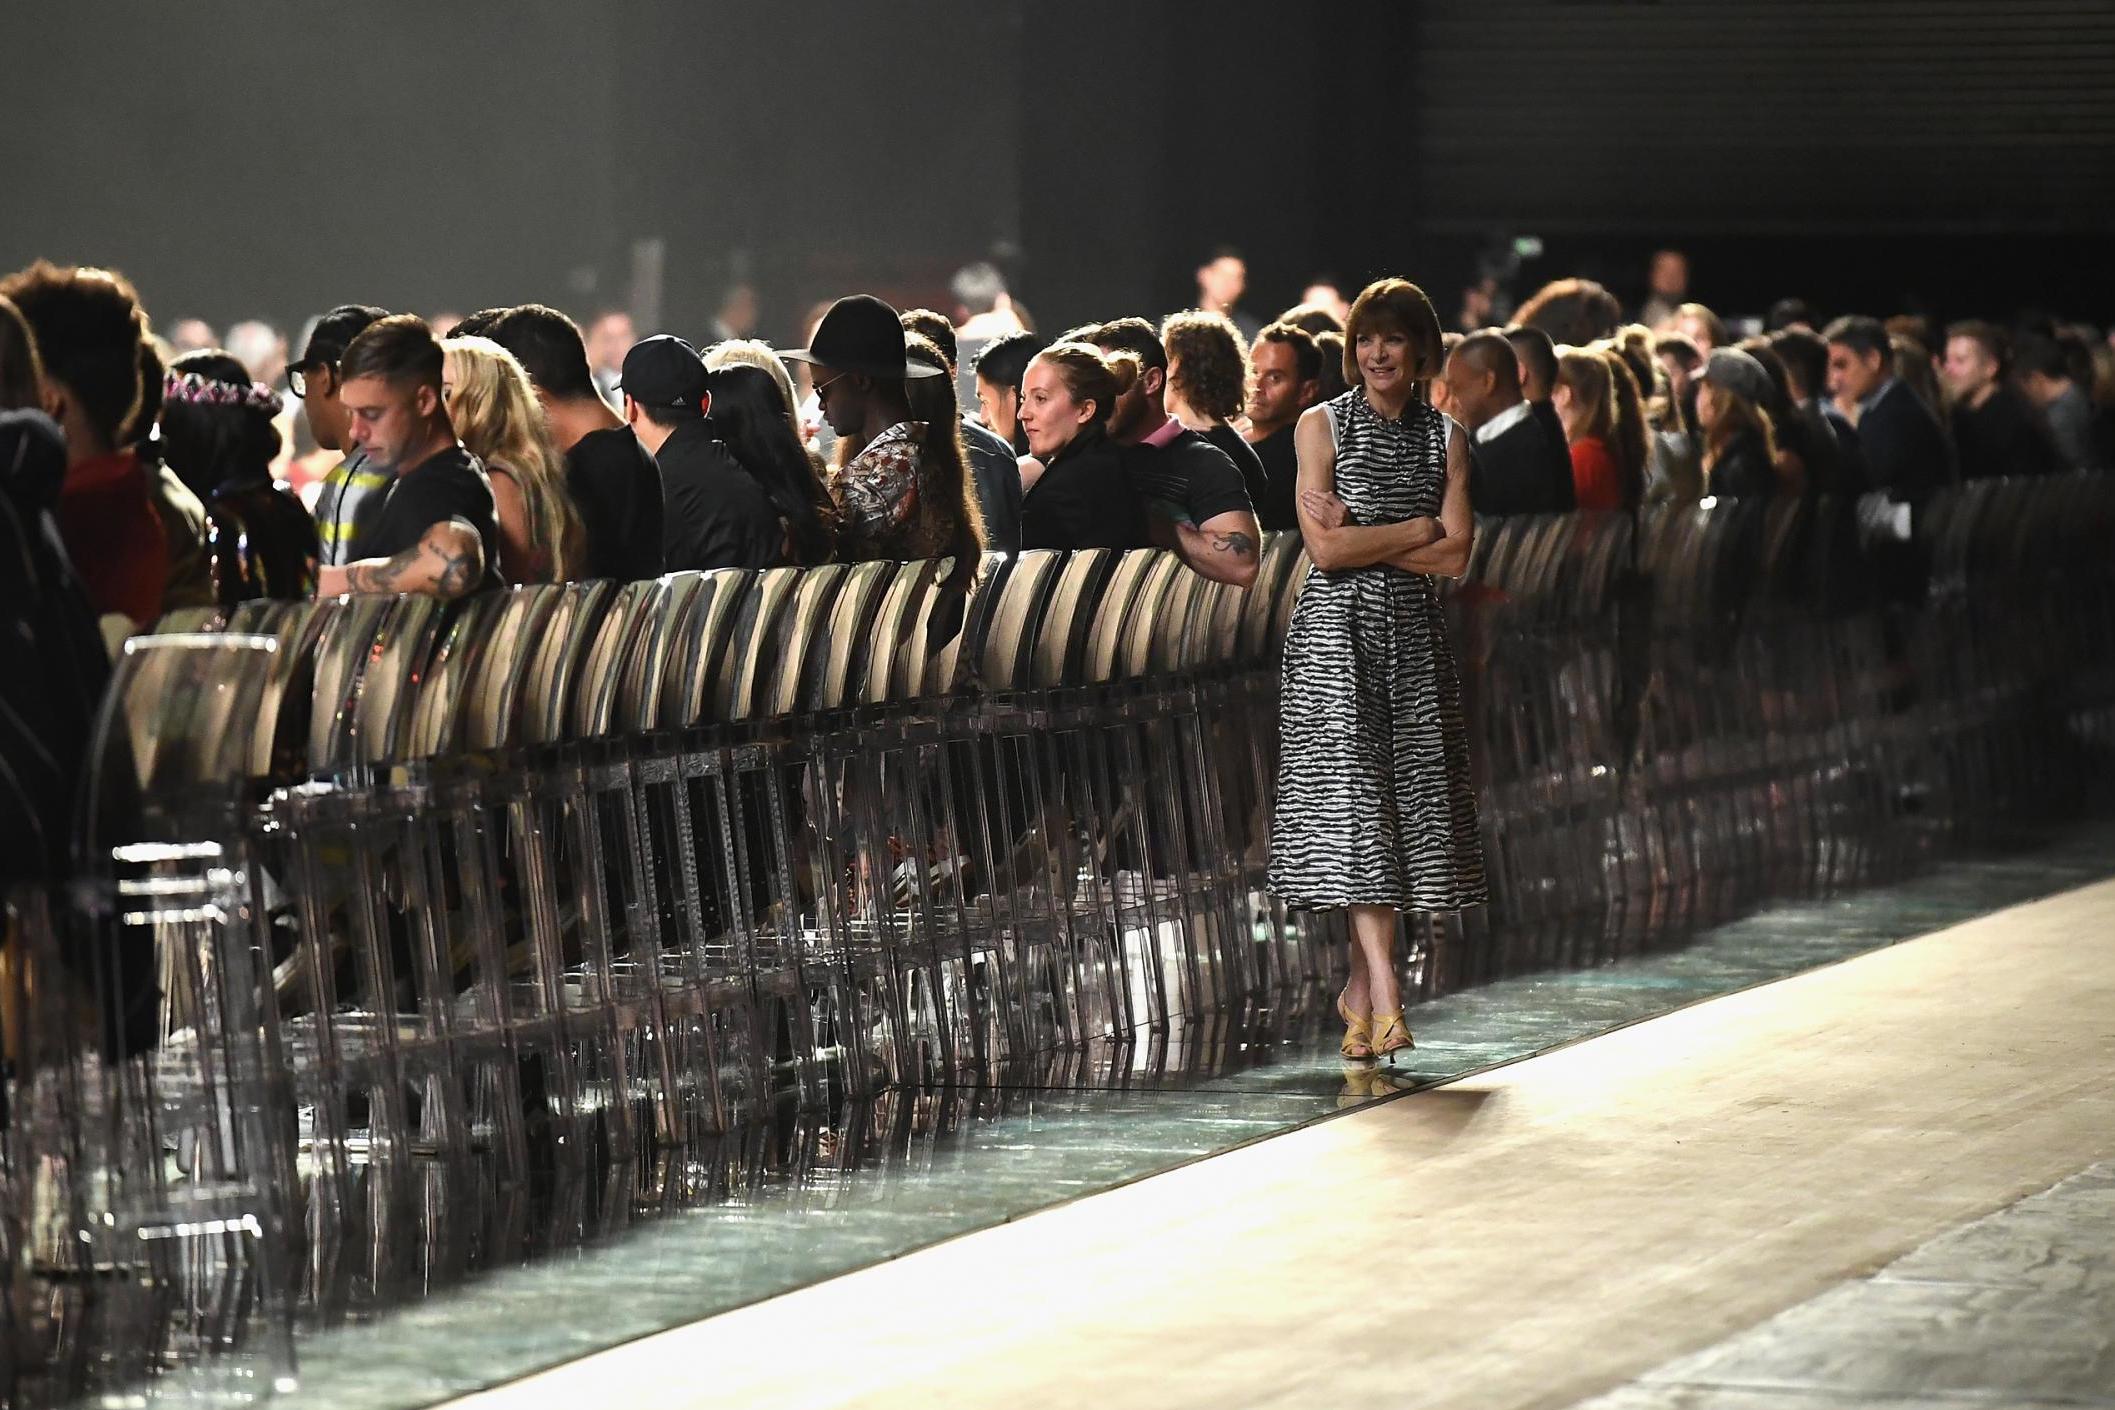 Drama and reflection as Marc Jacobs brings New York fashion week